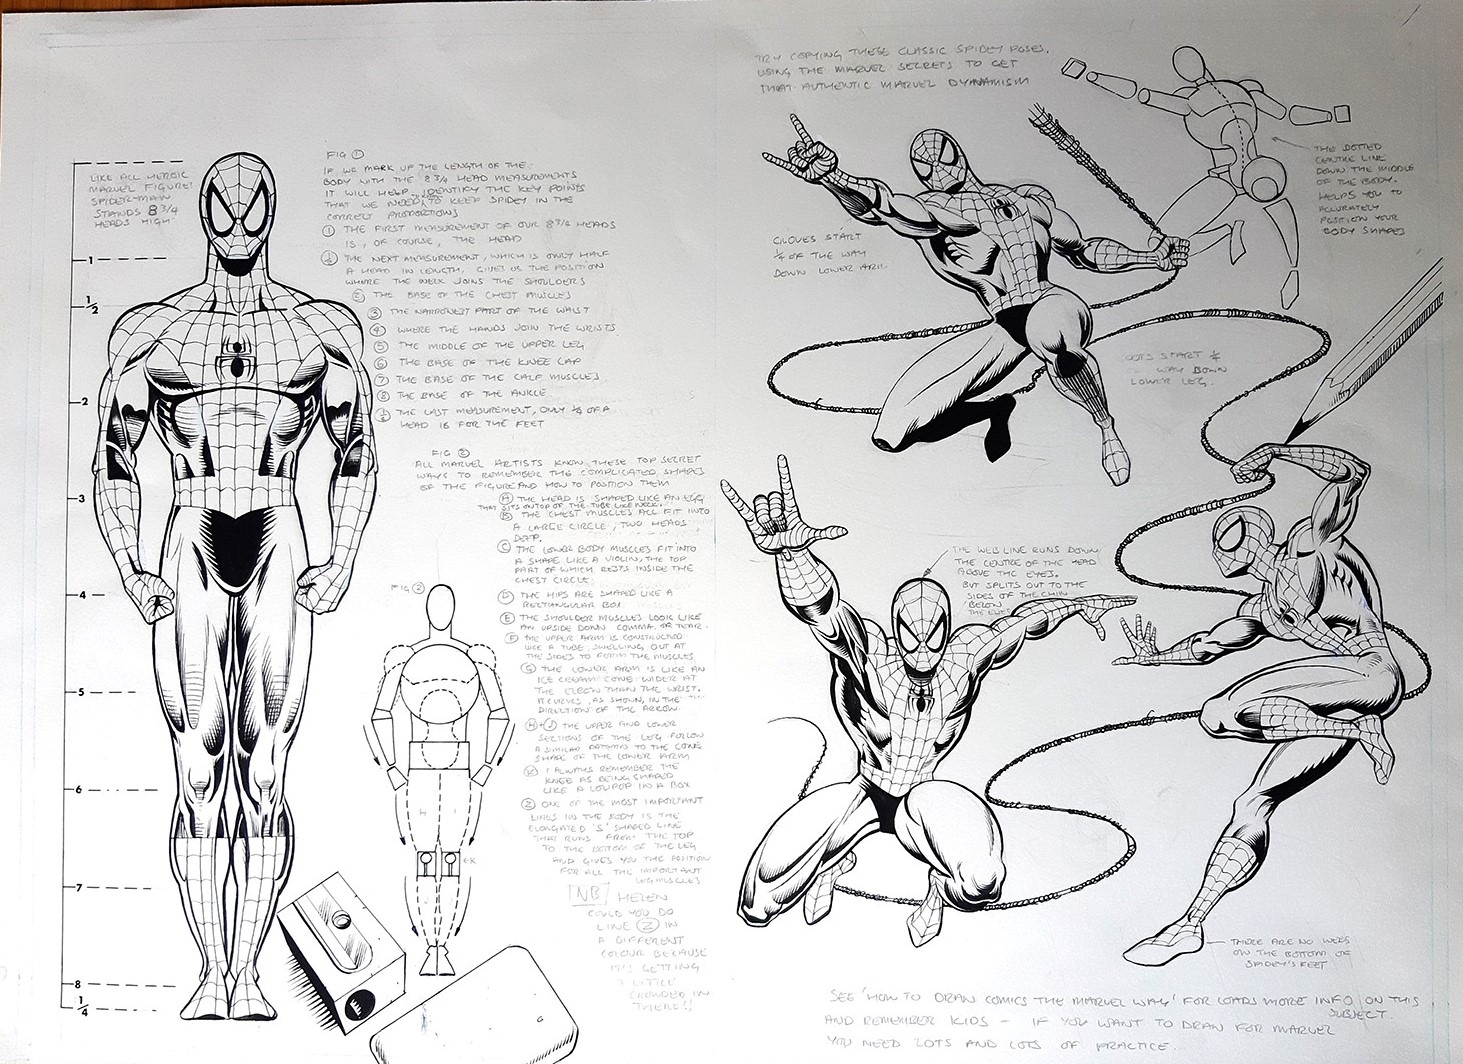 Learn to Draw SpiderMan The Marvel Way! Marvel UK, in David IMFan's